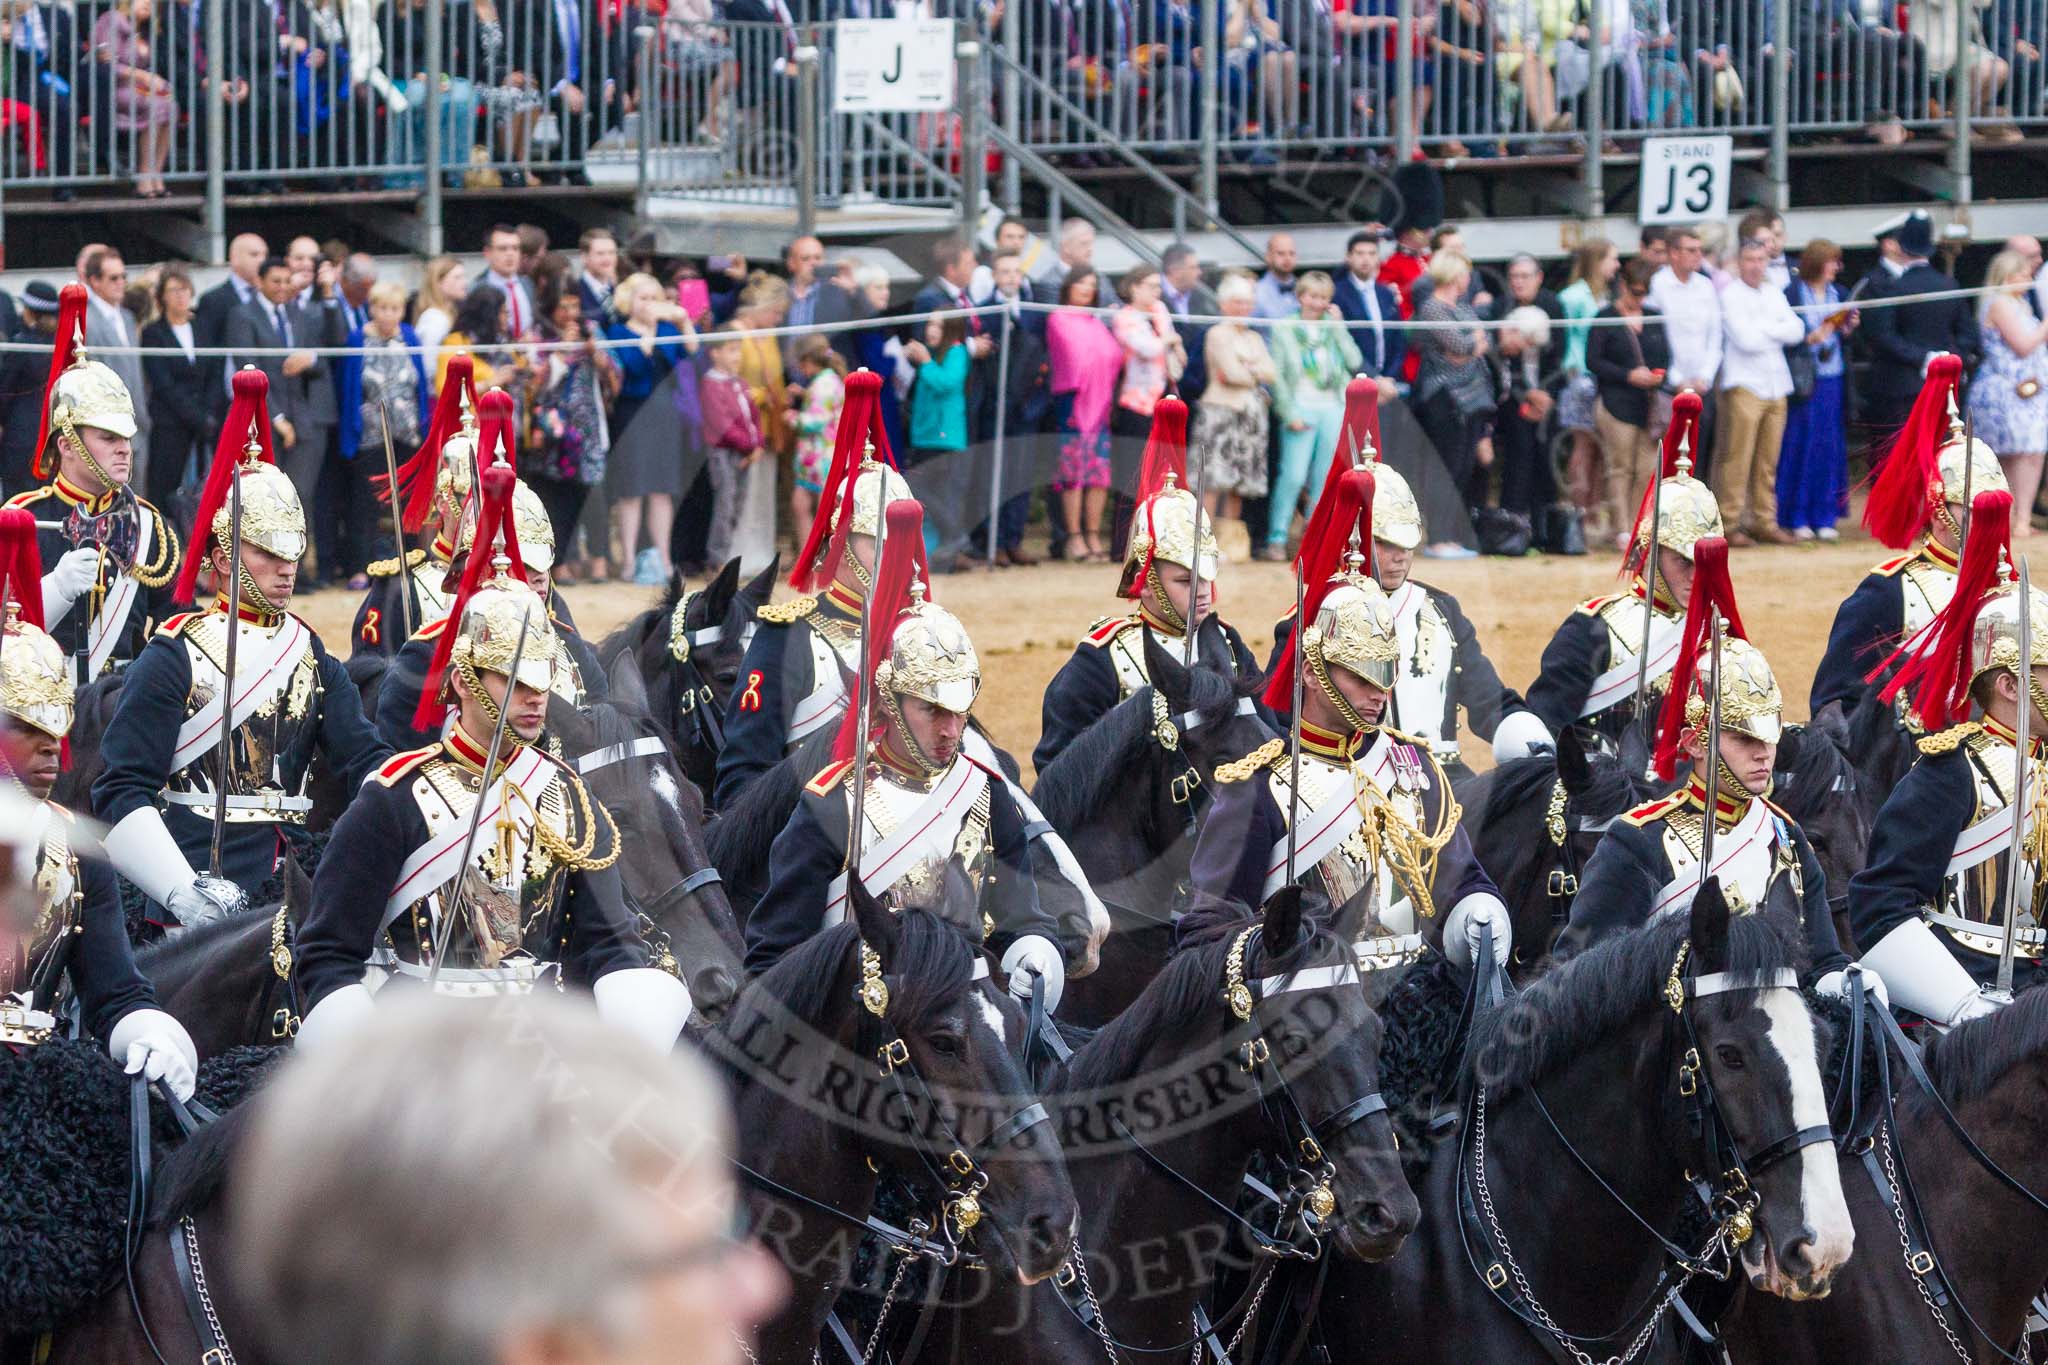 Trooping the Colour 2015. Image #569, 13 June 2015 11:54 Horse Guards Parade, London, UK